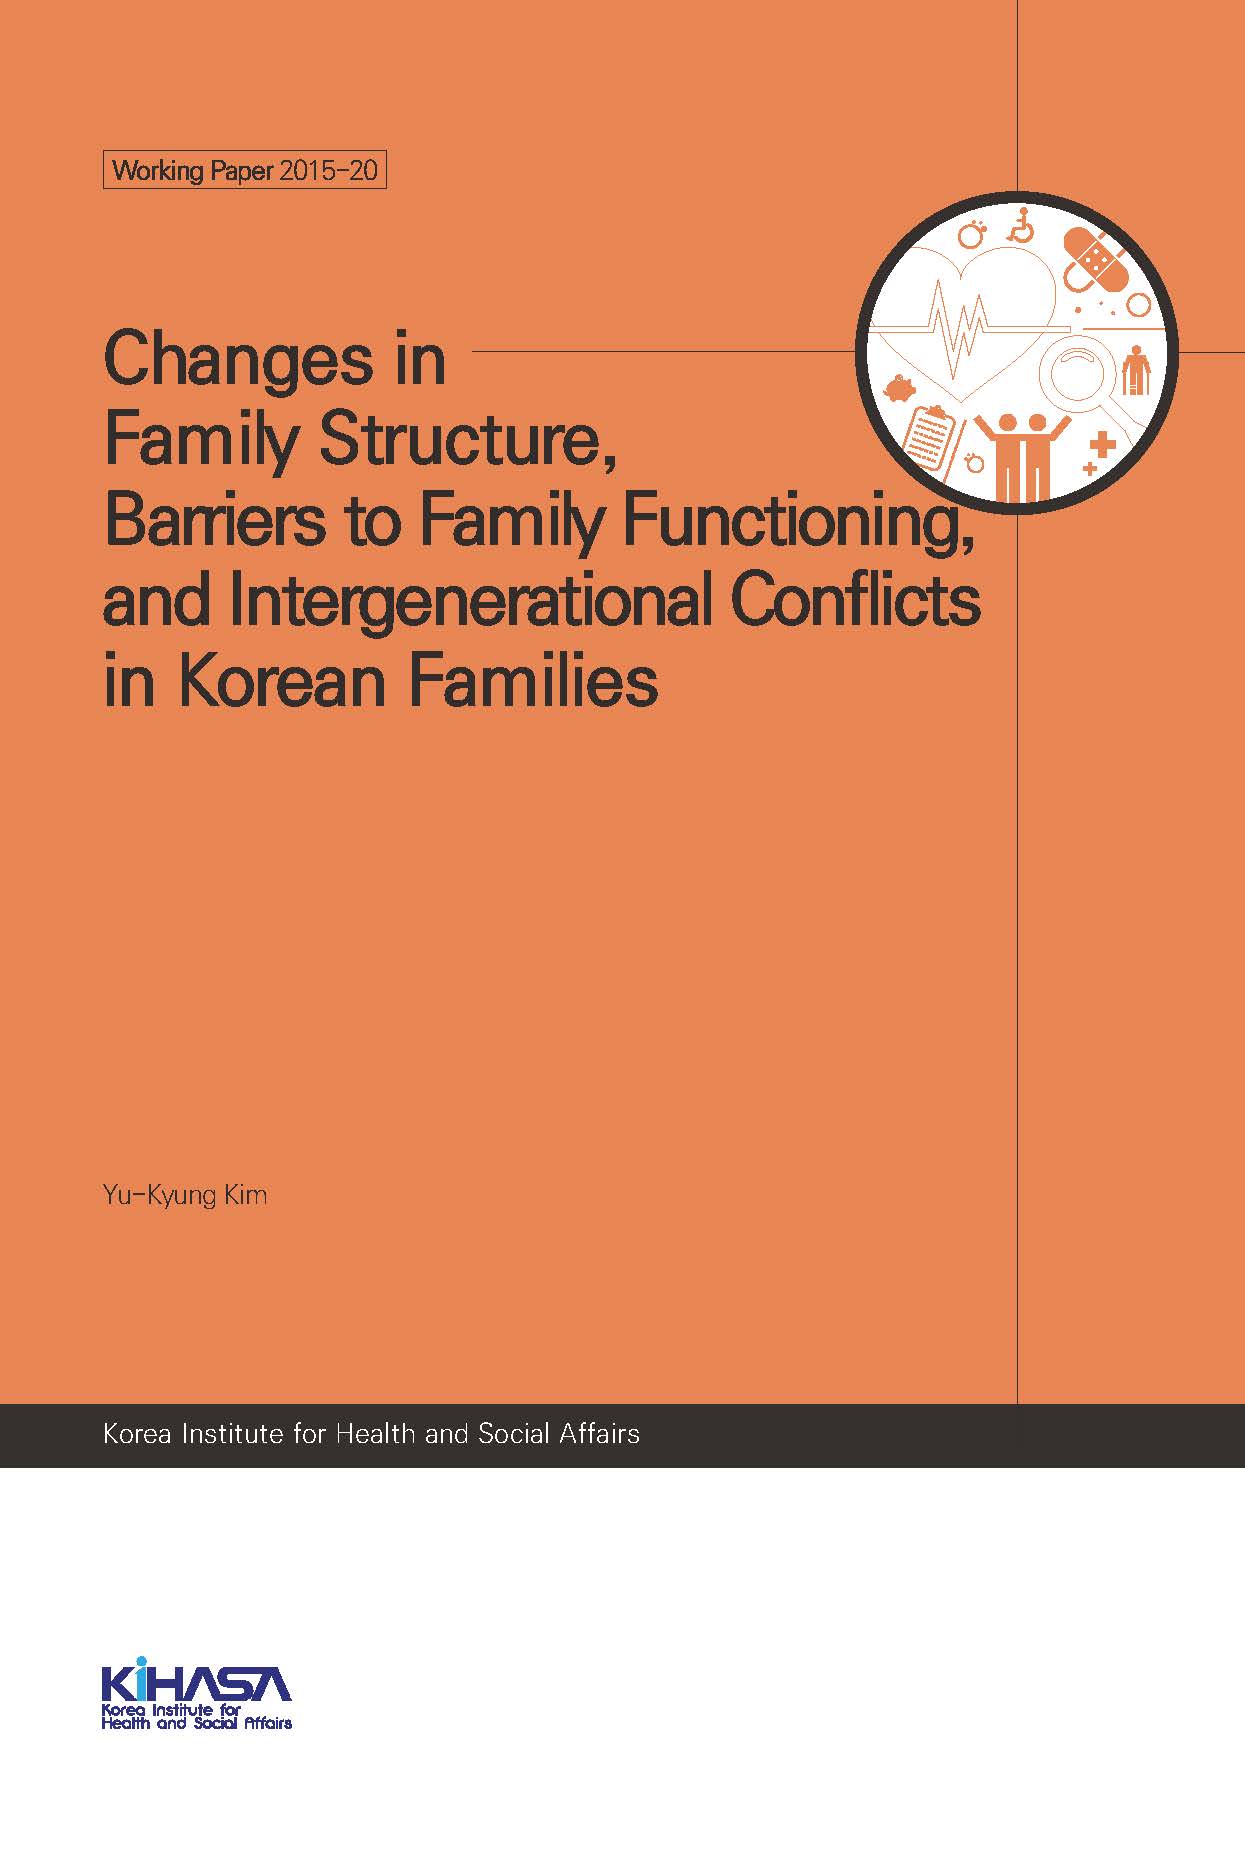 Changes in Family Structure, Barriers to Family Functioning, and Intergenerational Conflicts in Korean Families